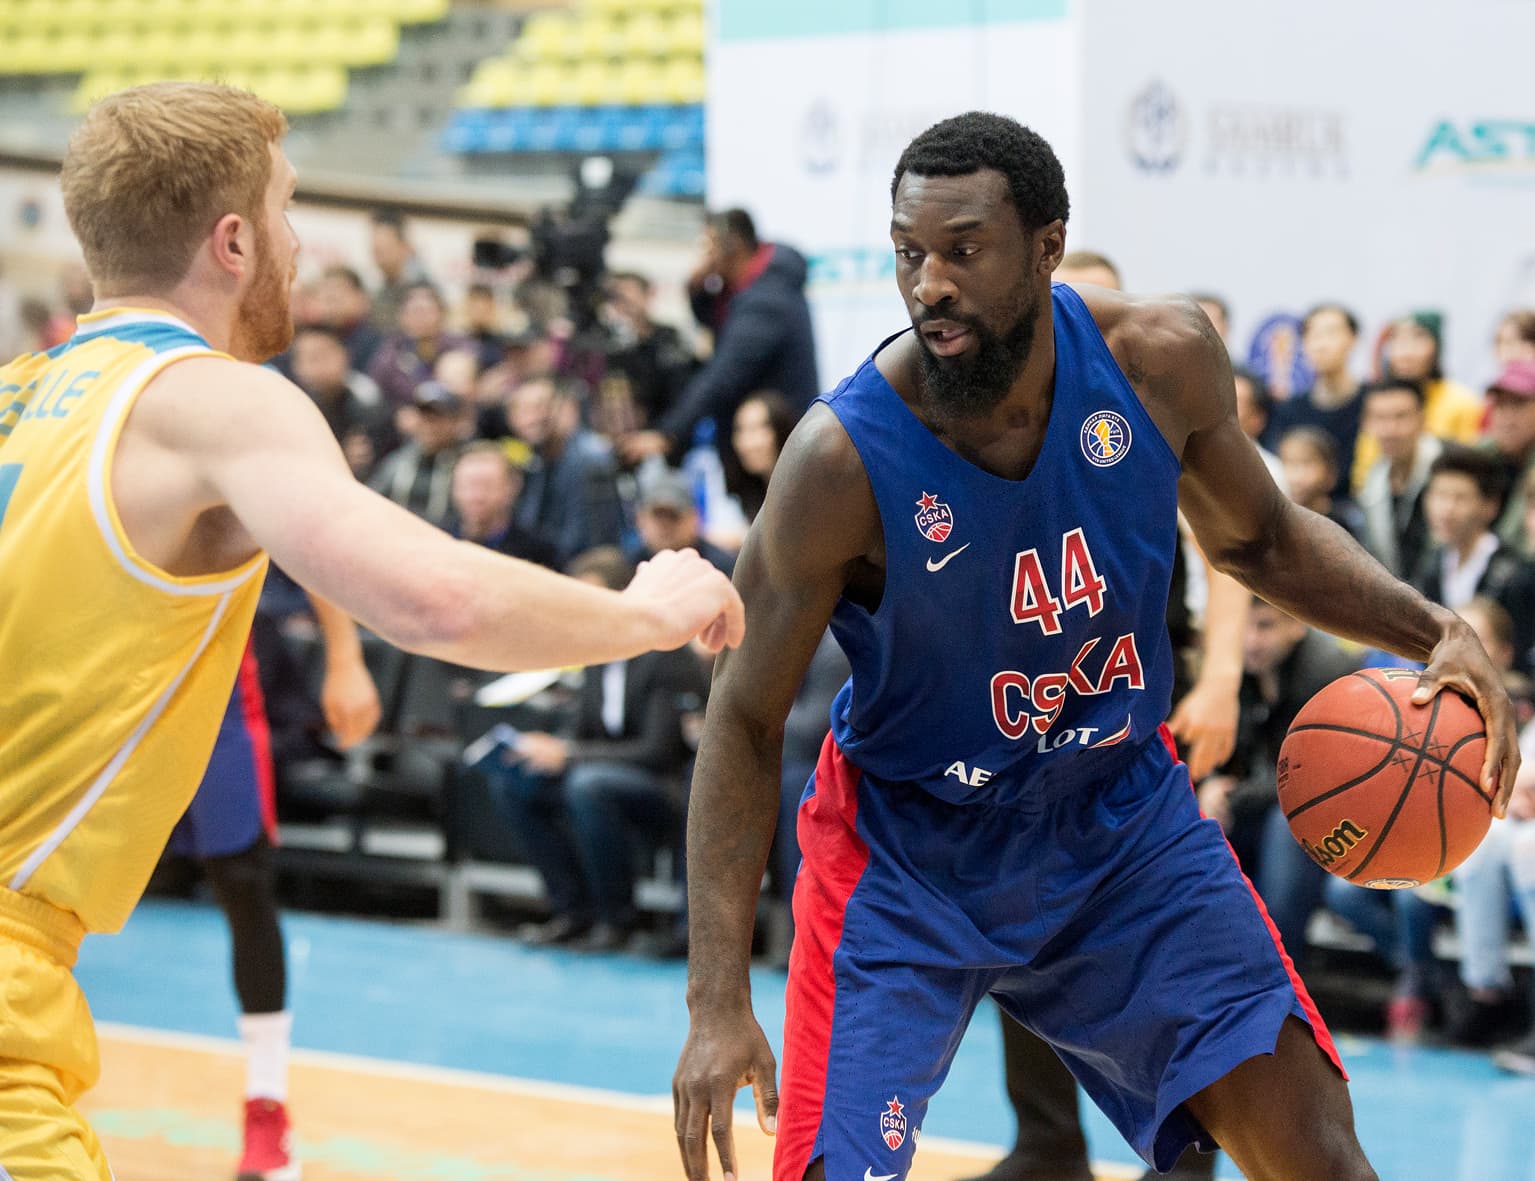 Army Men Wear Down Astana On The Road